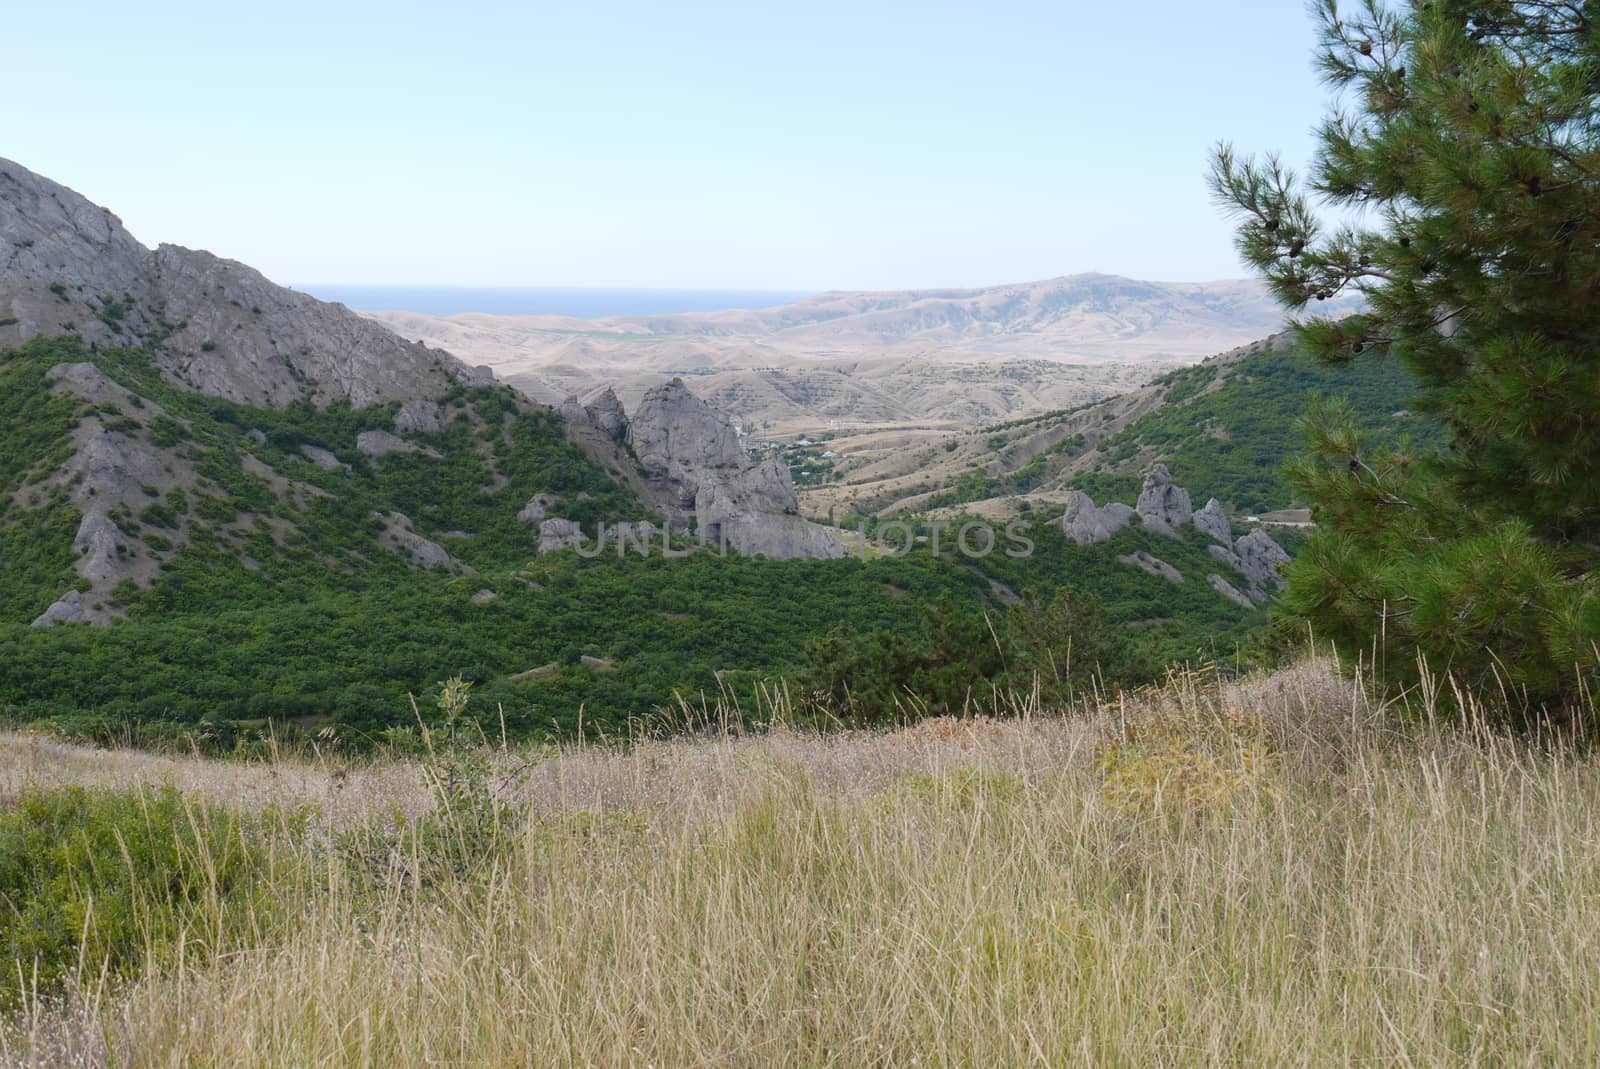 View from the top to the green valley with deciduous trees and the nearby mountain ranges by Adamchuk